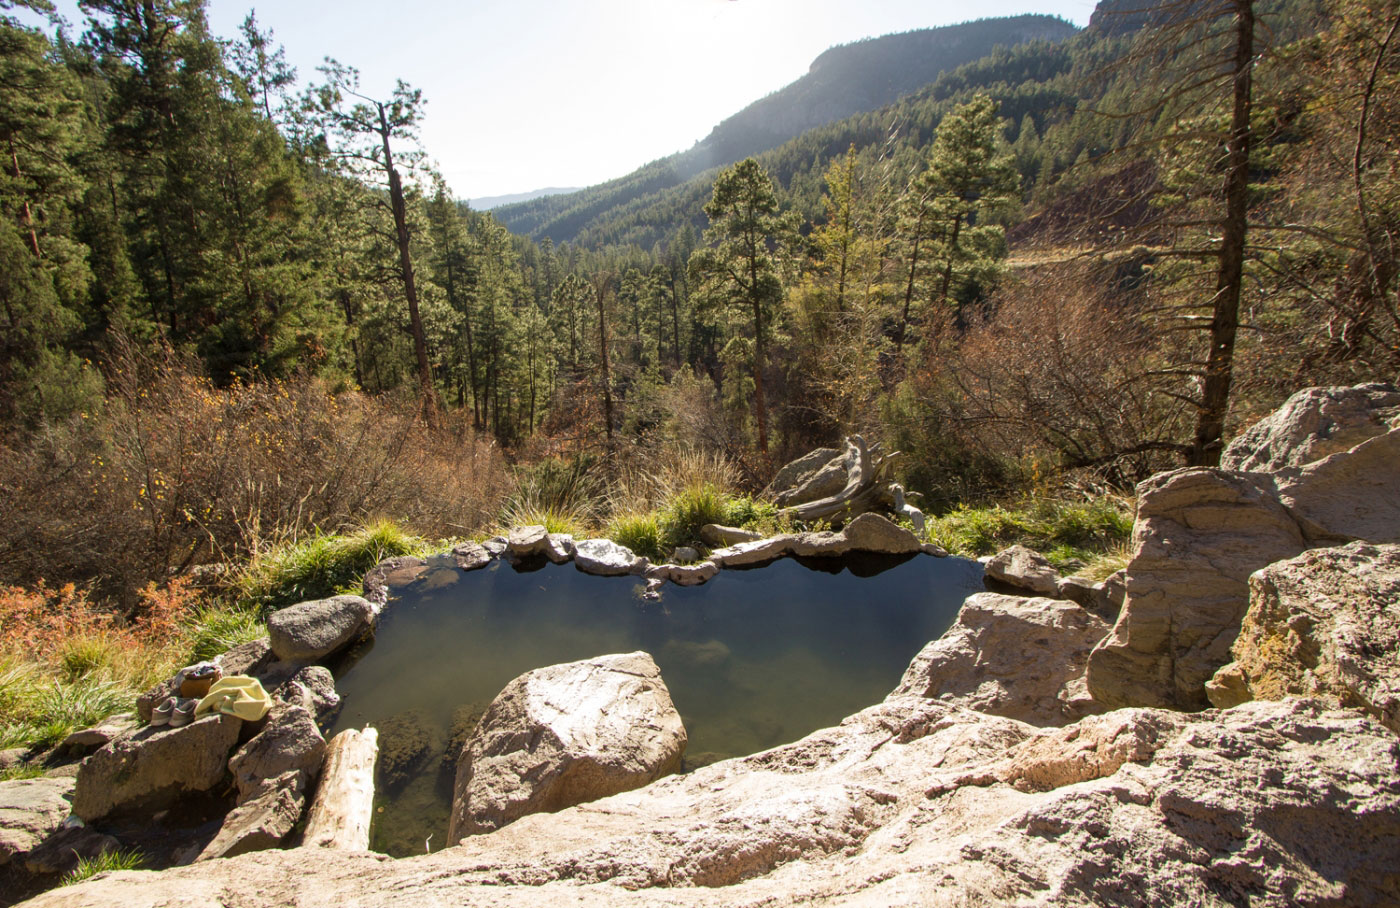 Hike Spence Hot Springs in Santa Fe National Forest, New Mexico - Stav is Lost